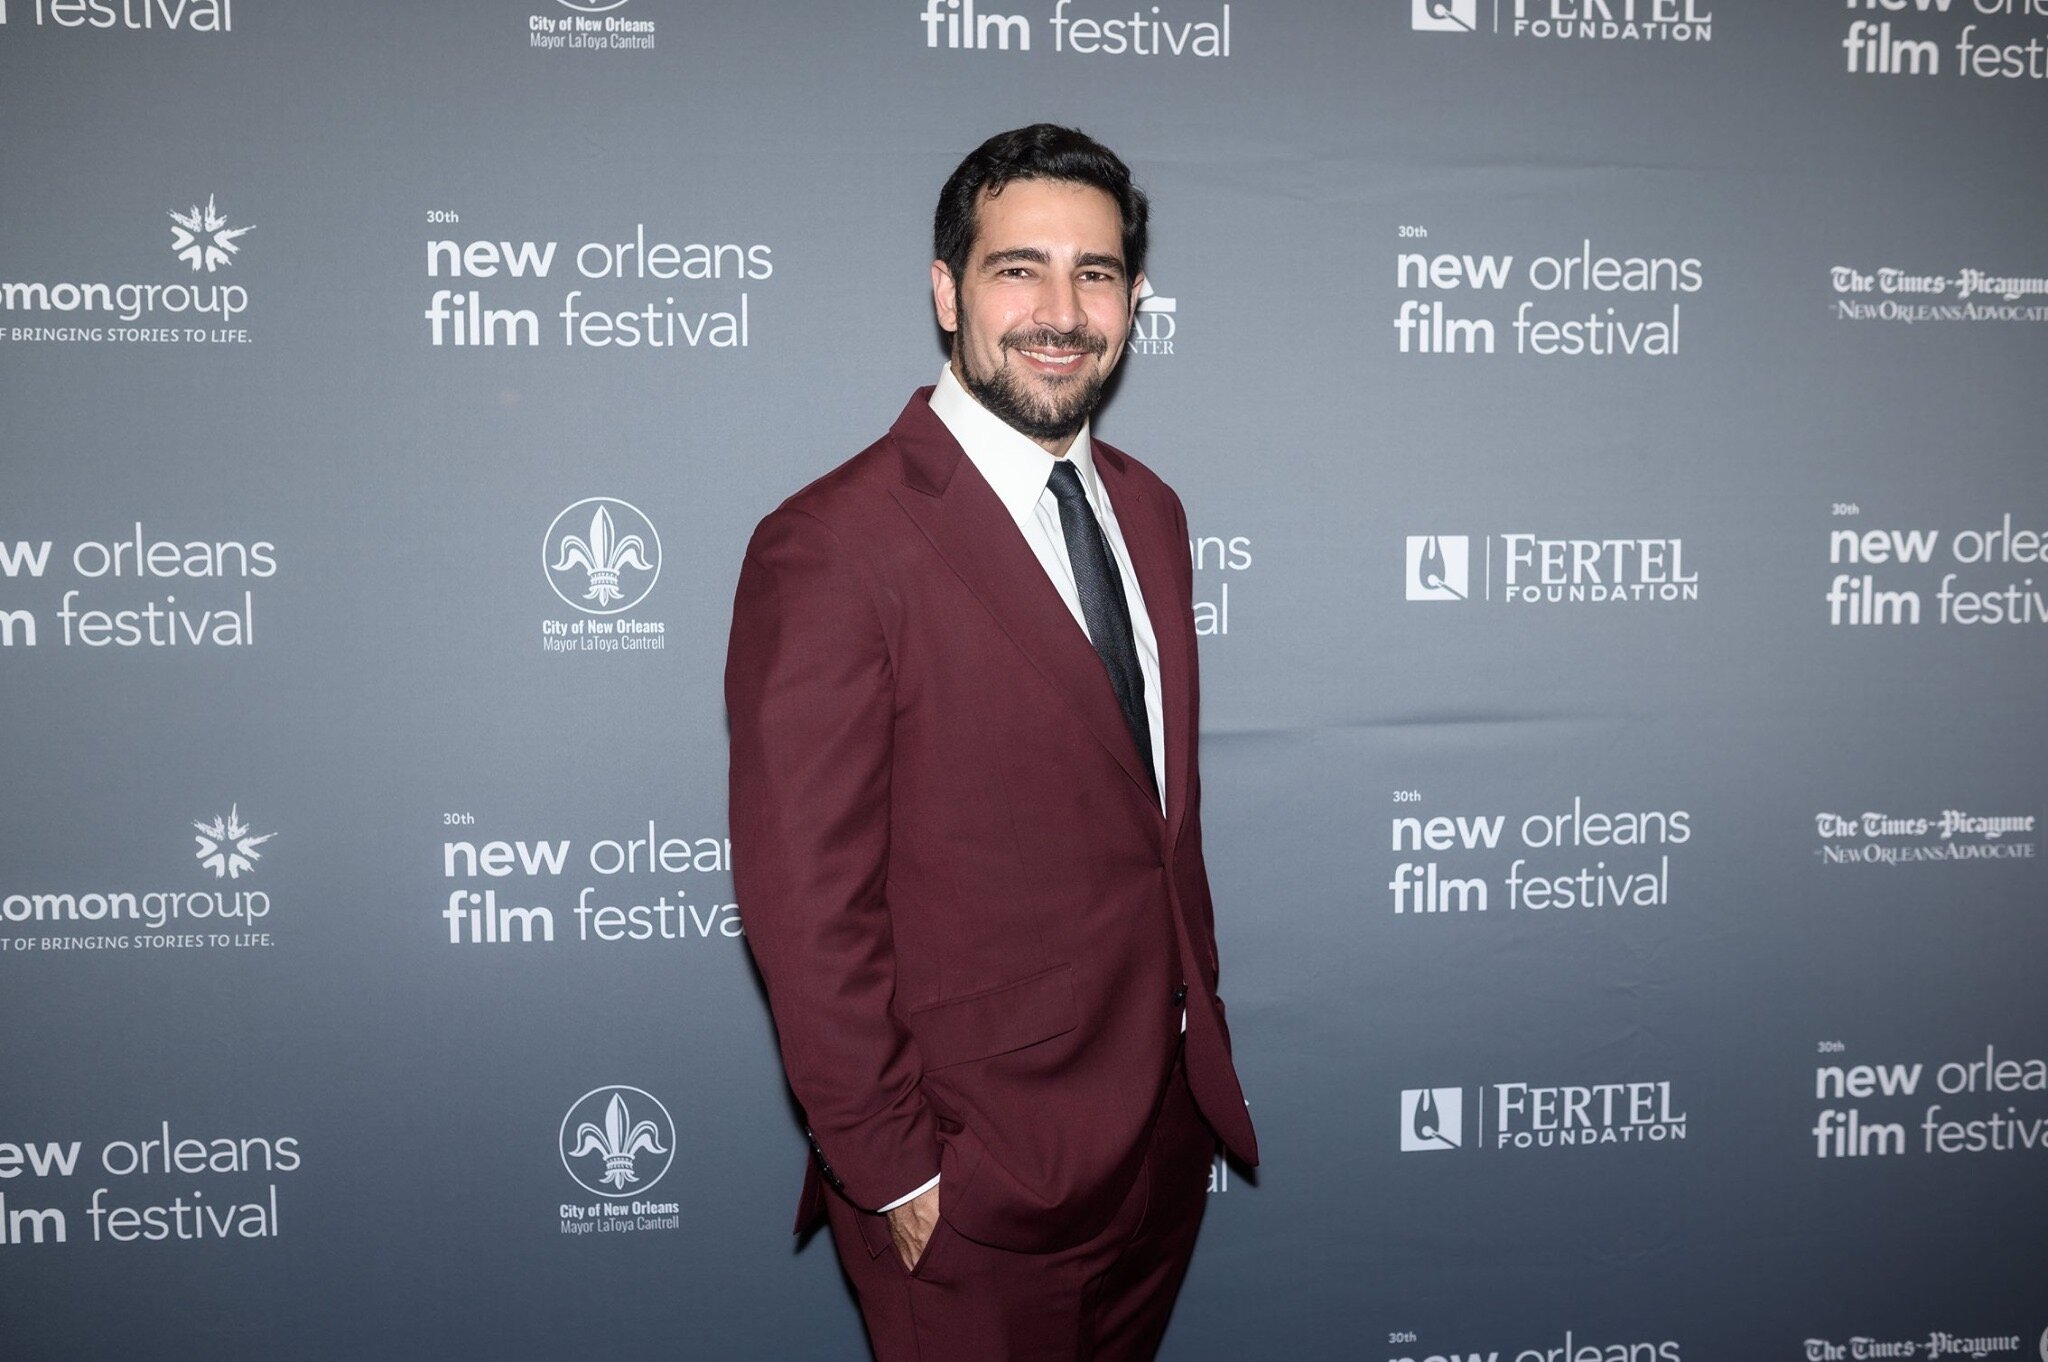 This is us: Homegrown artists are the real stars of the 2019 New Orleans Film Festival